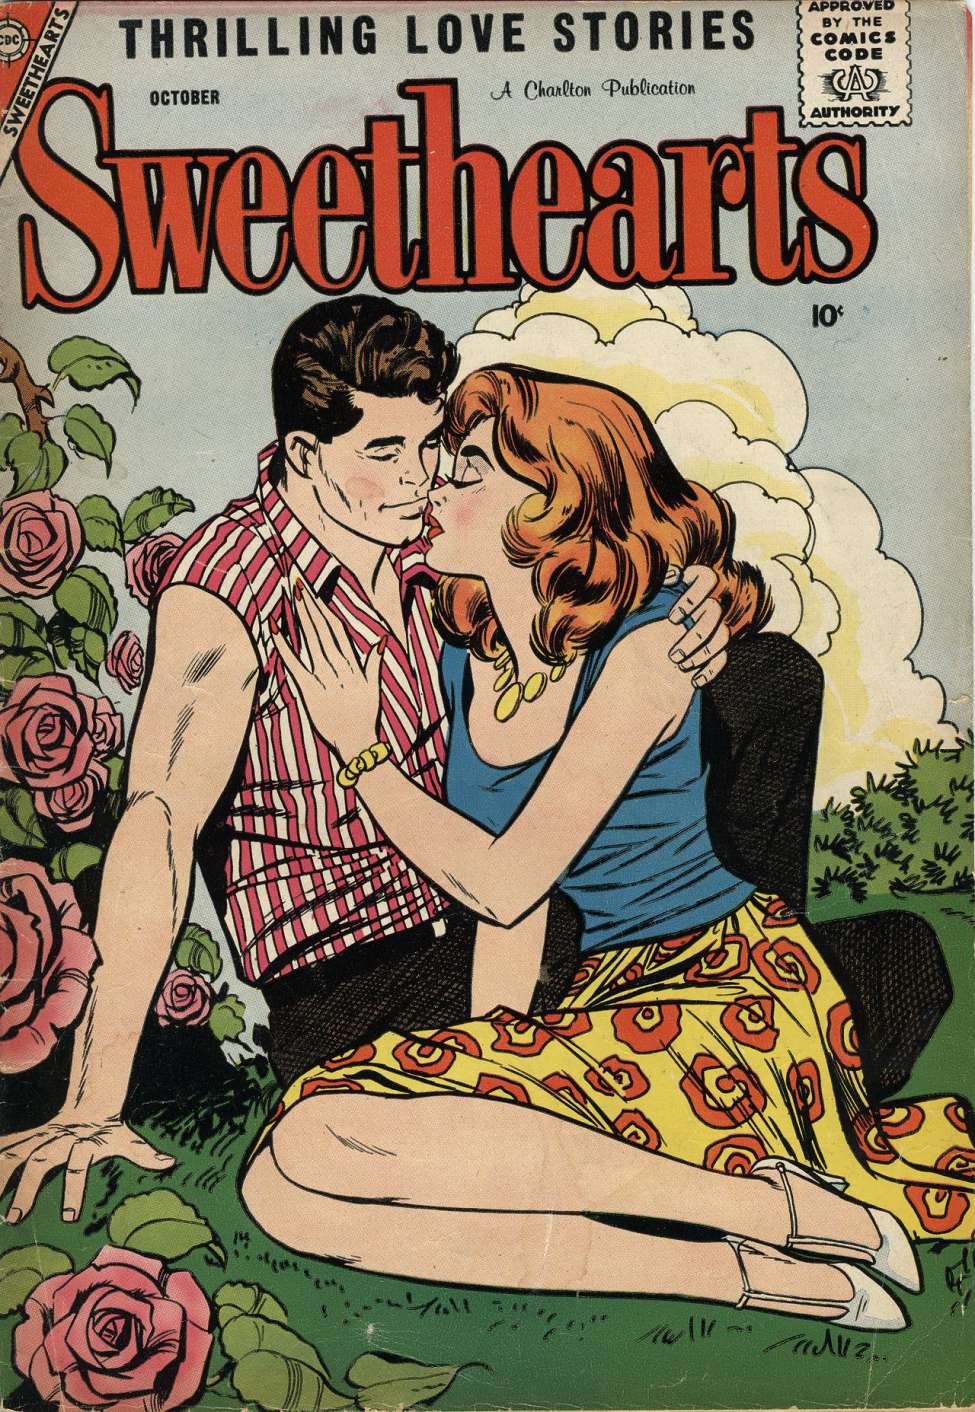 Book Cover For Sweethearts 45 - Version 2